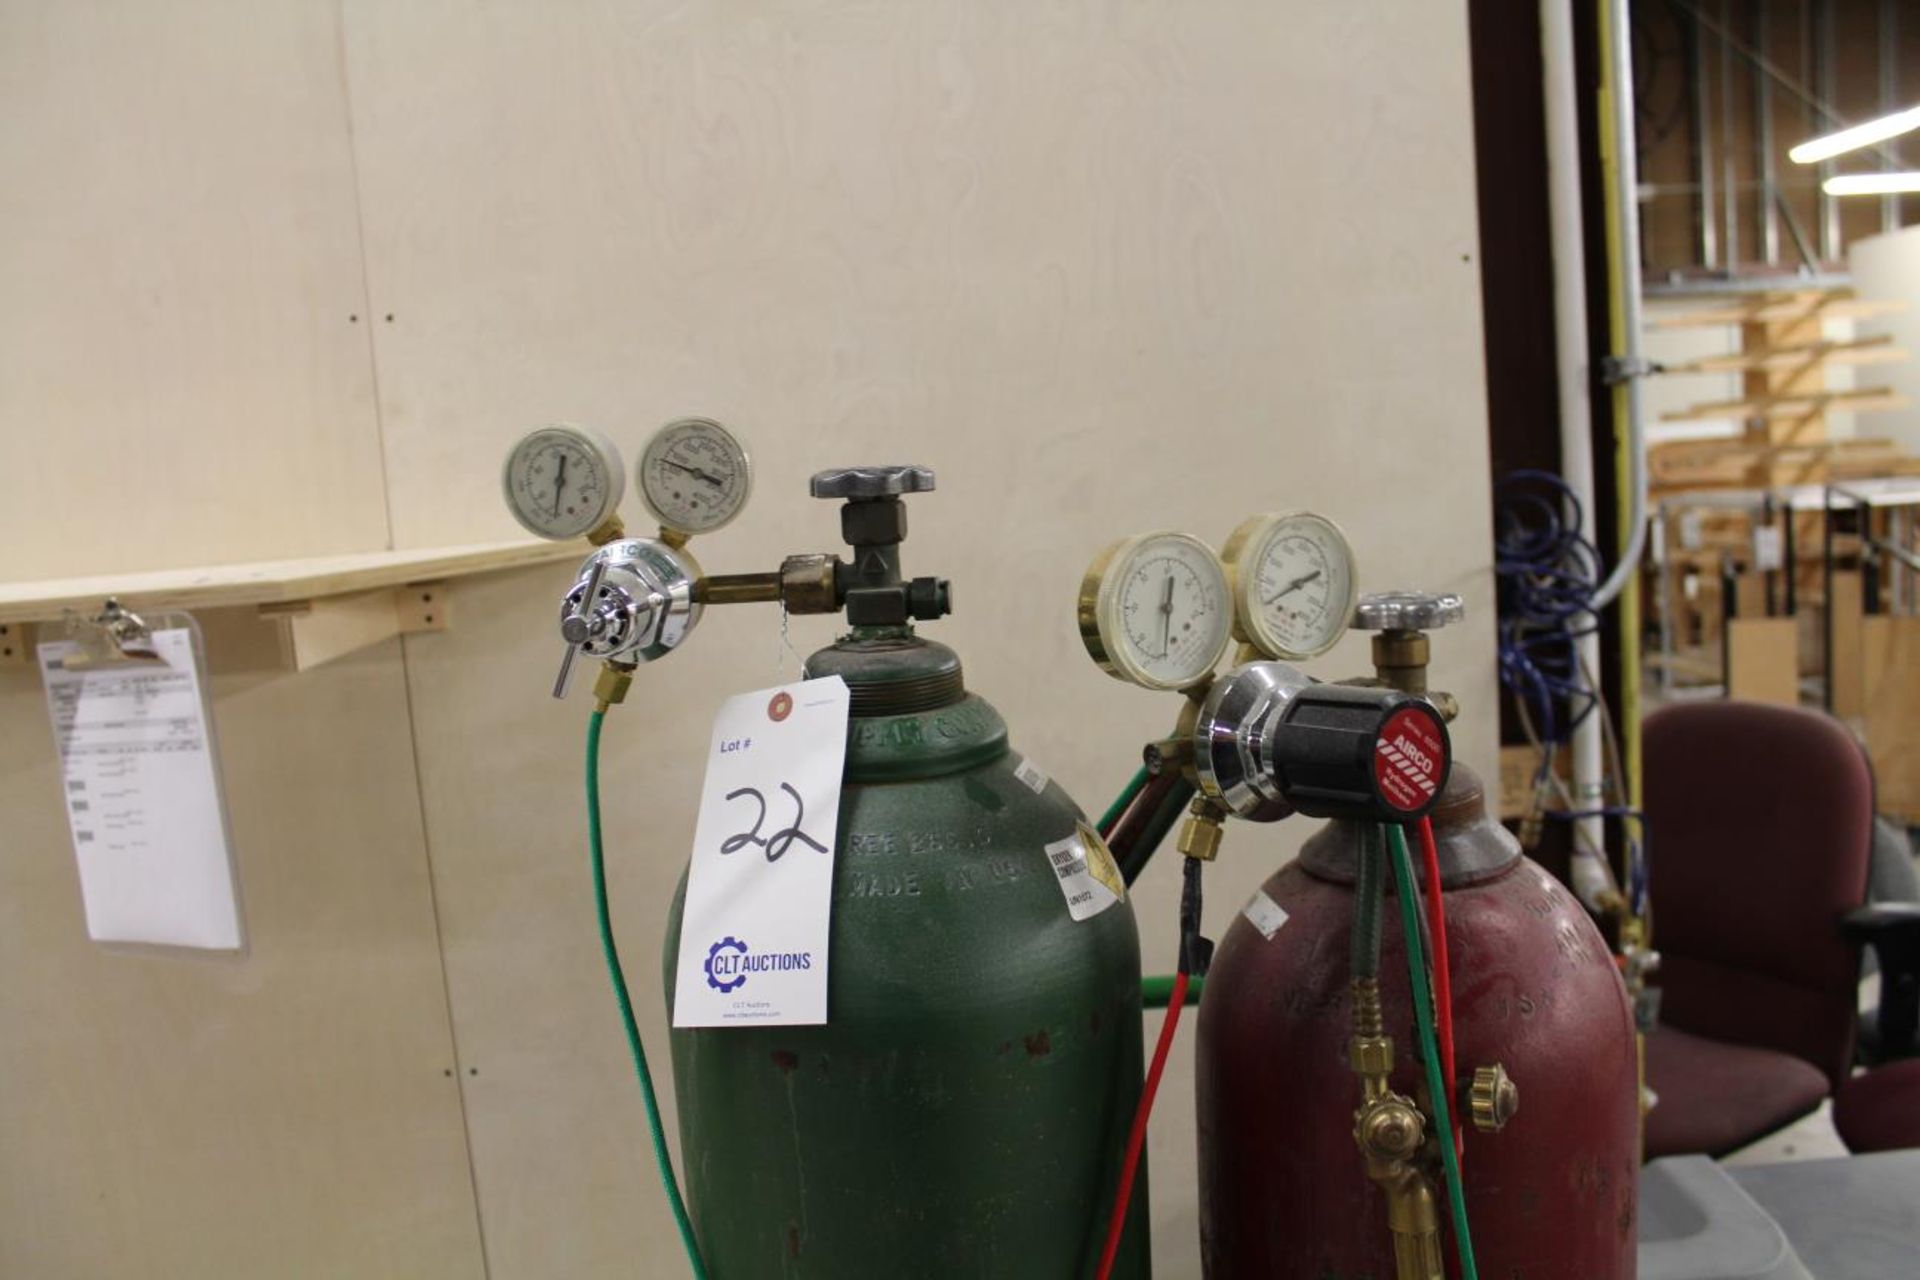 Torch Cart, Torches, Hoses and Gauges  (Tanks are Rented) - Image 3 of 4